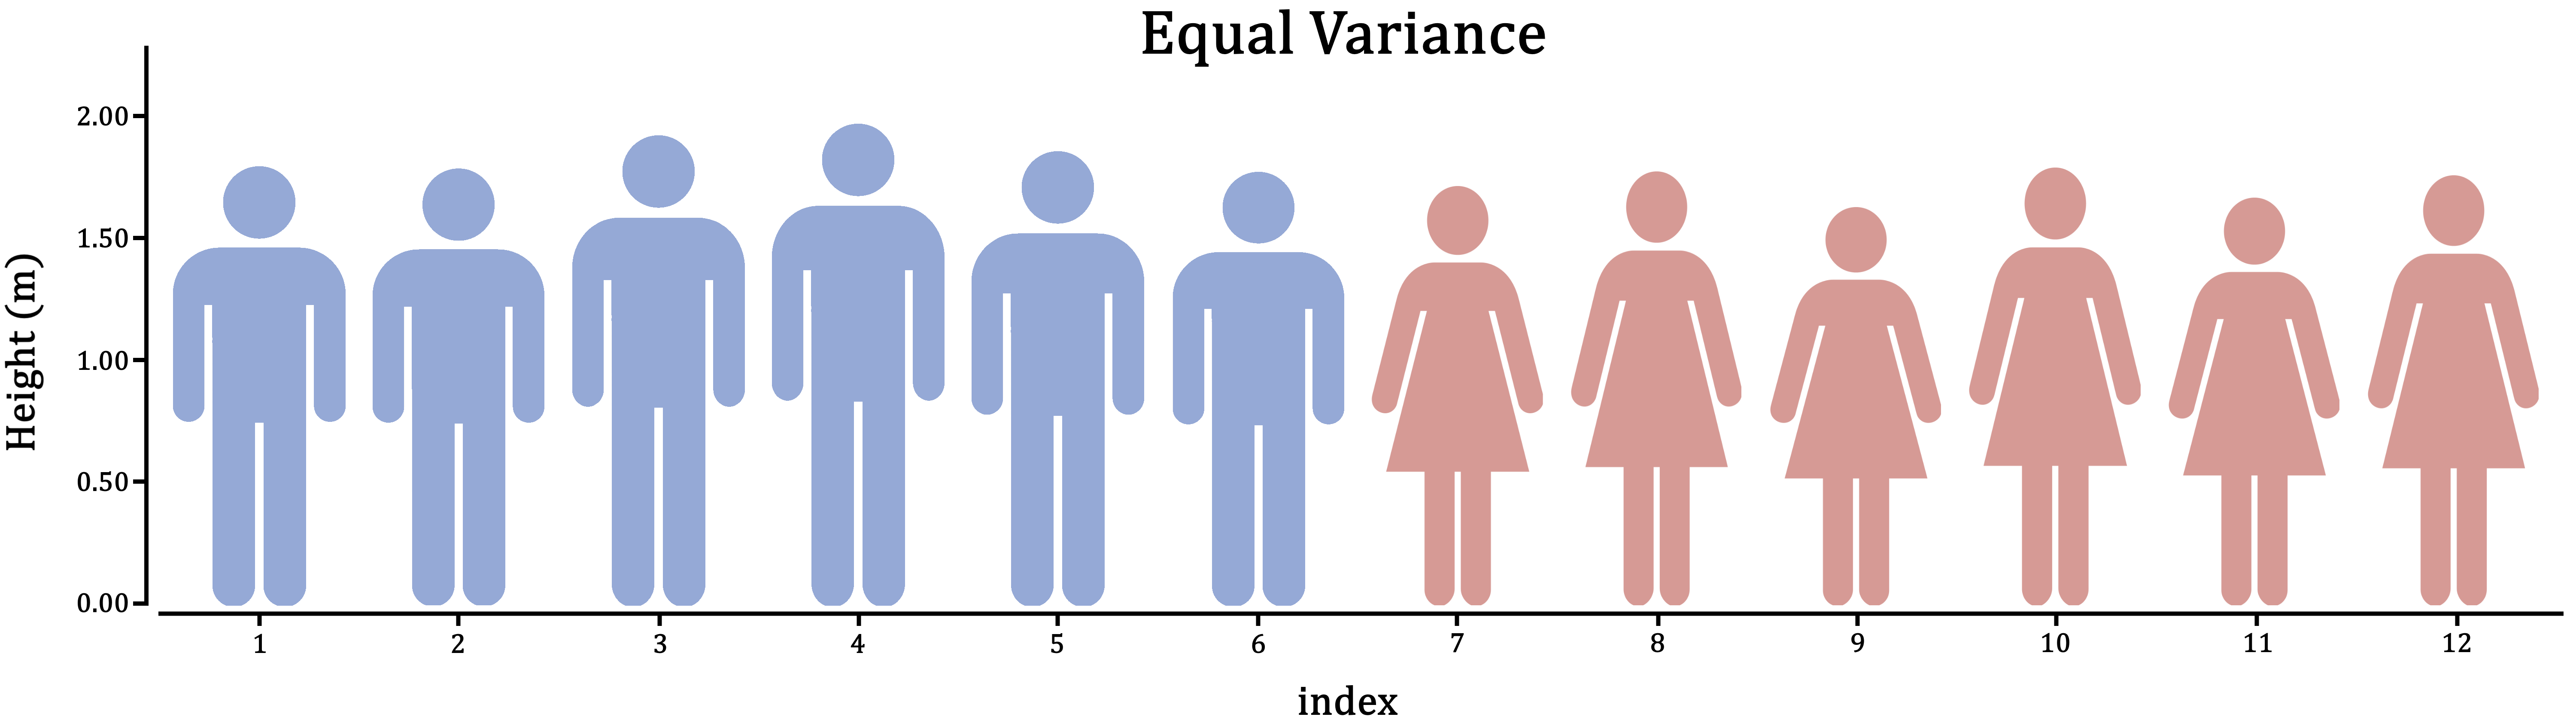 Variance is the extent to which individuals differ from their group mean. In the case of male and female human height, which do you think is more realistic?